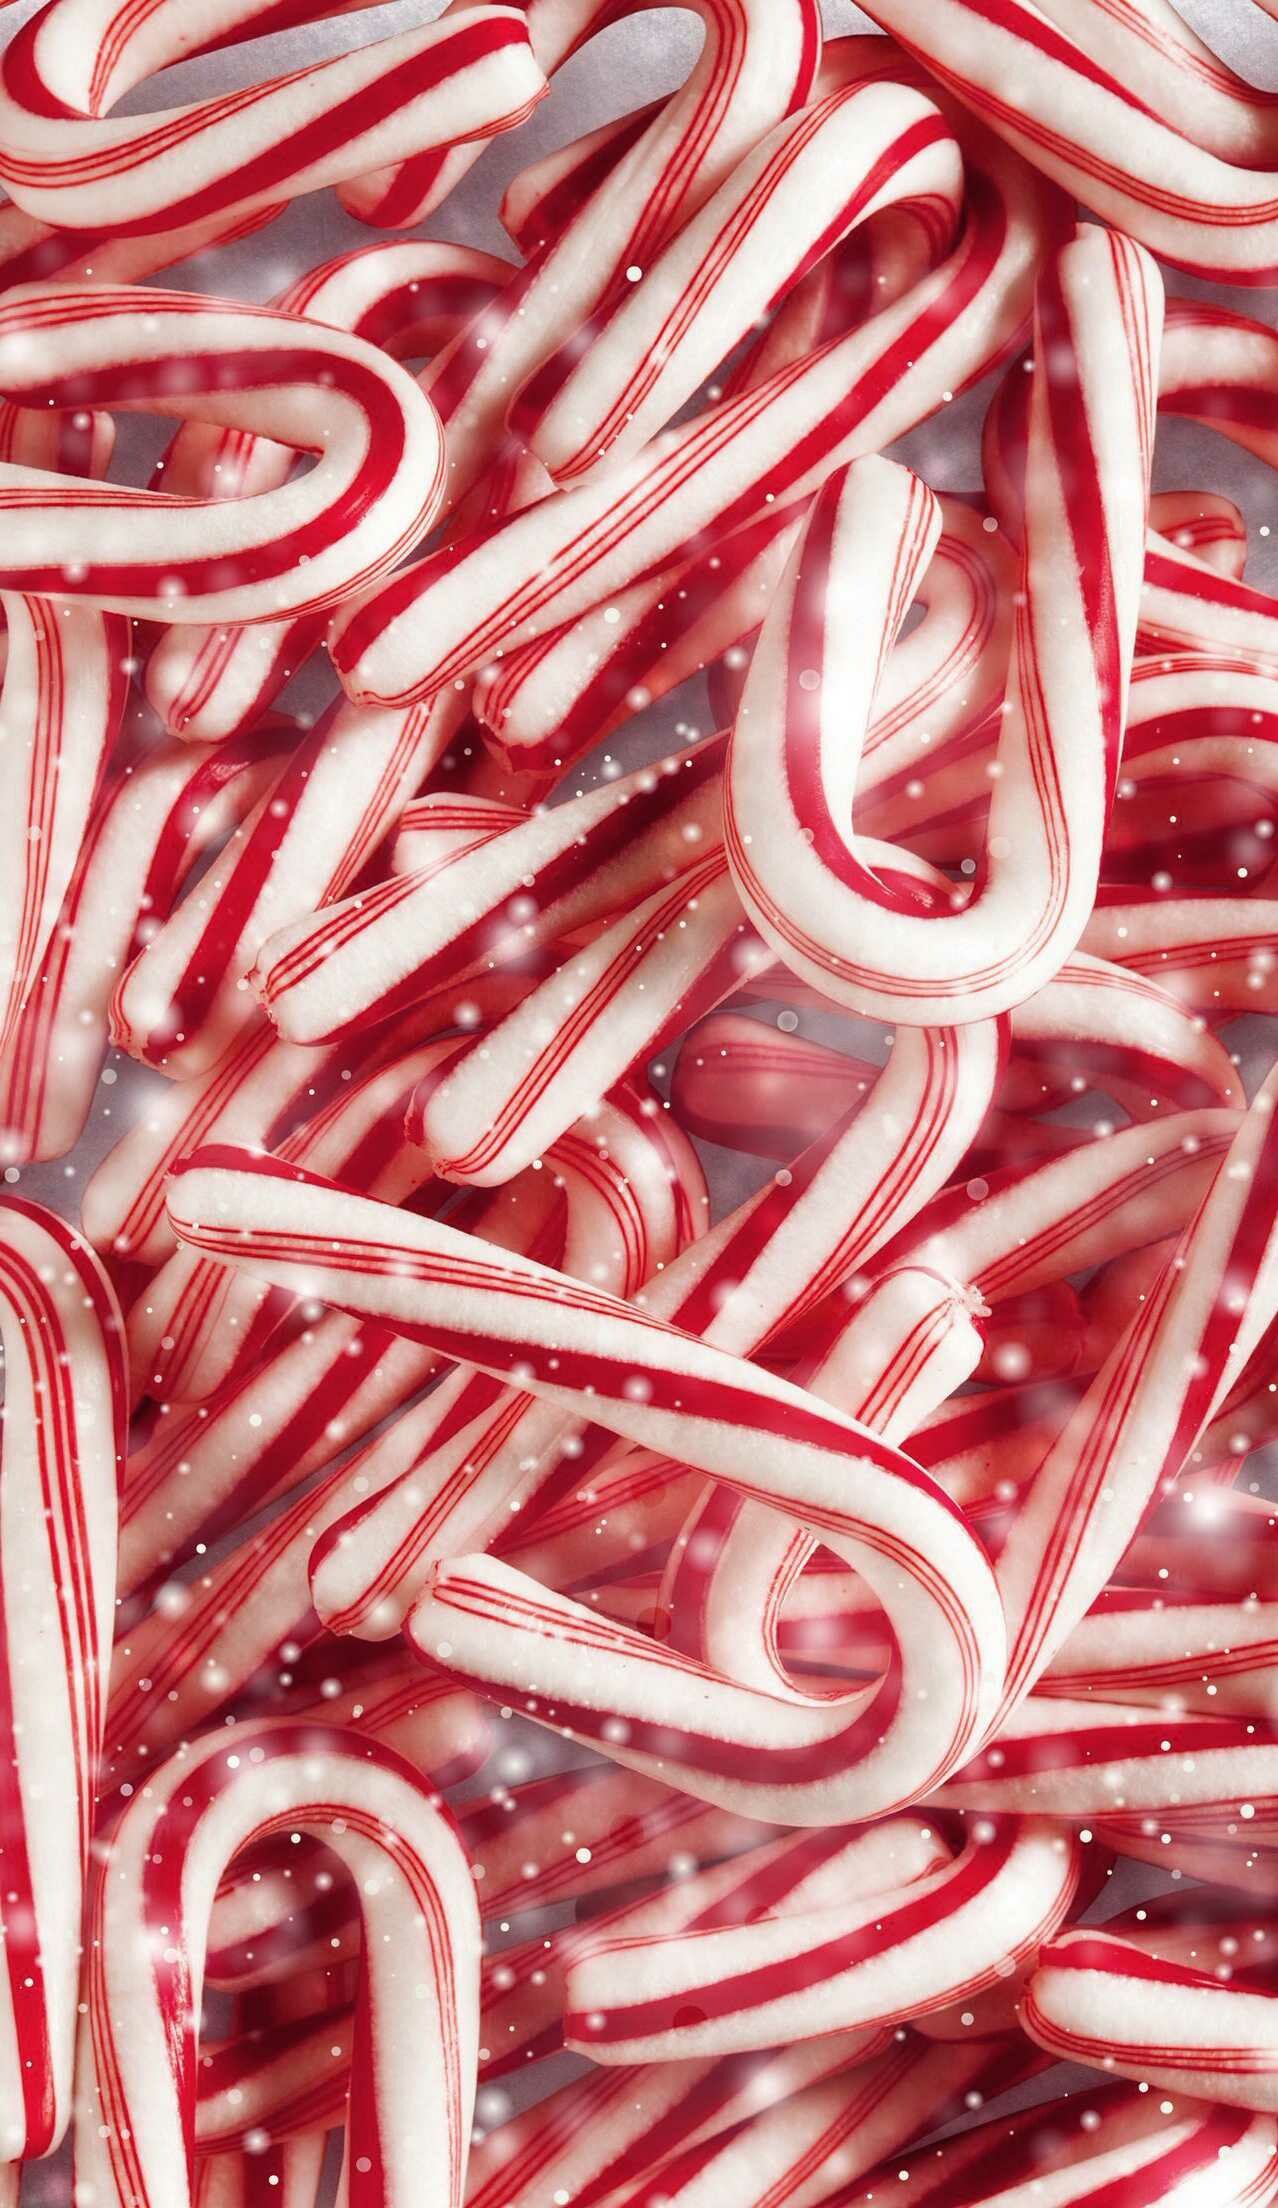 Sweets: Candy cane, Cane-shaped stick candy often associated with Christmastide. 1280x2210 HD Wallpaper.